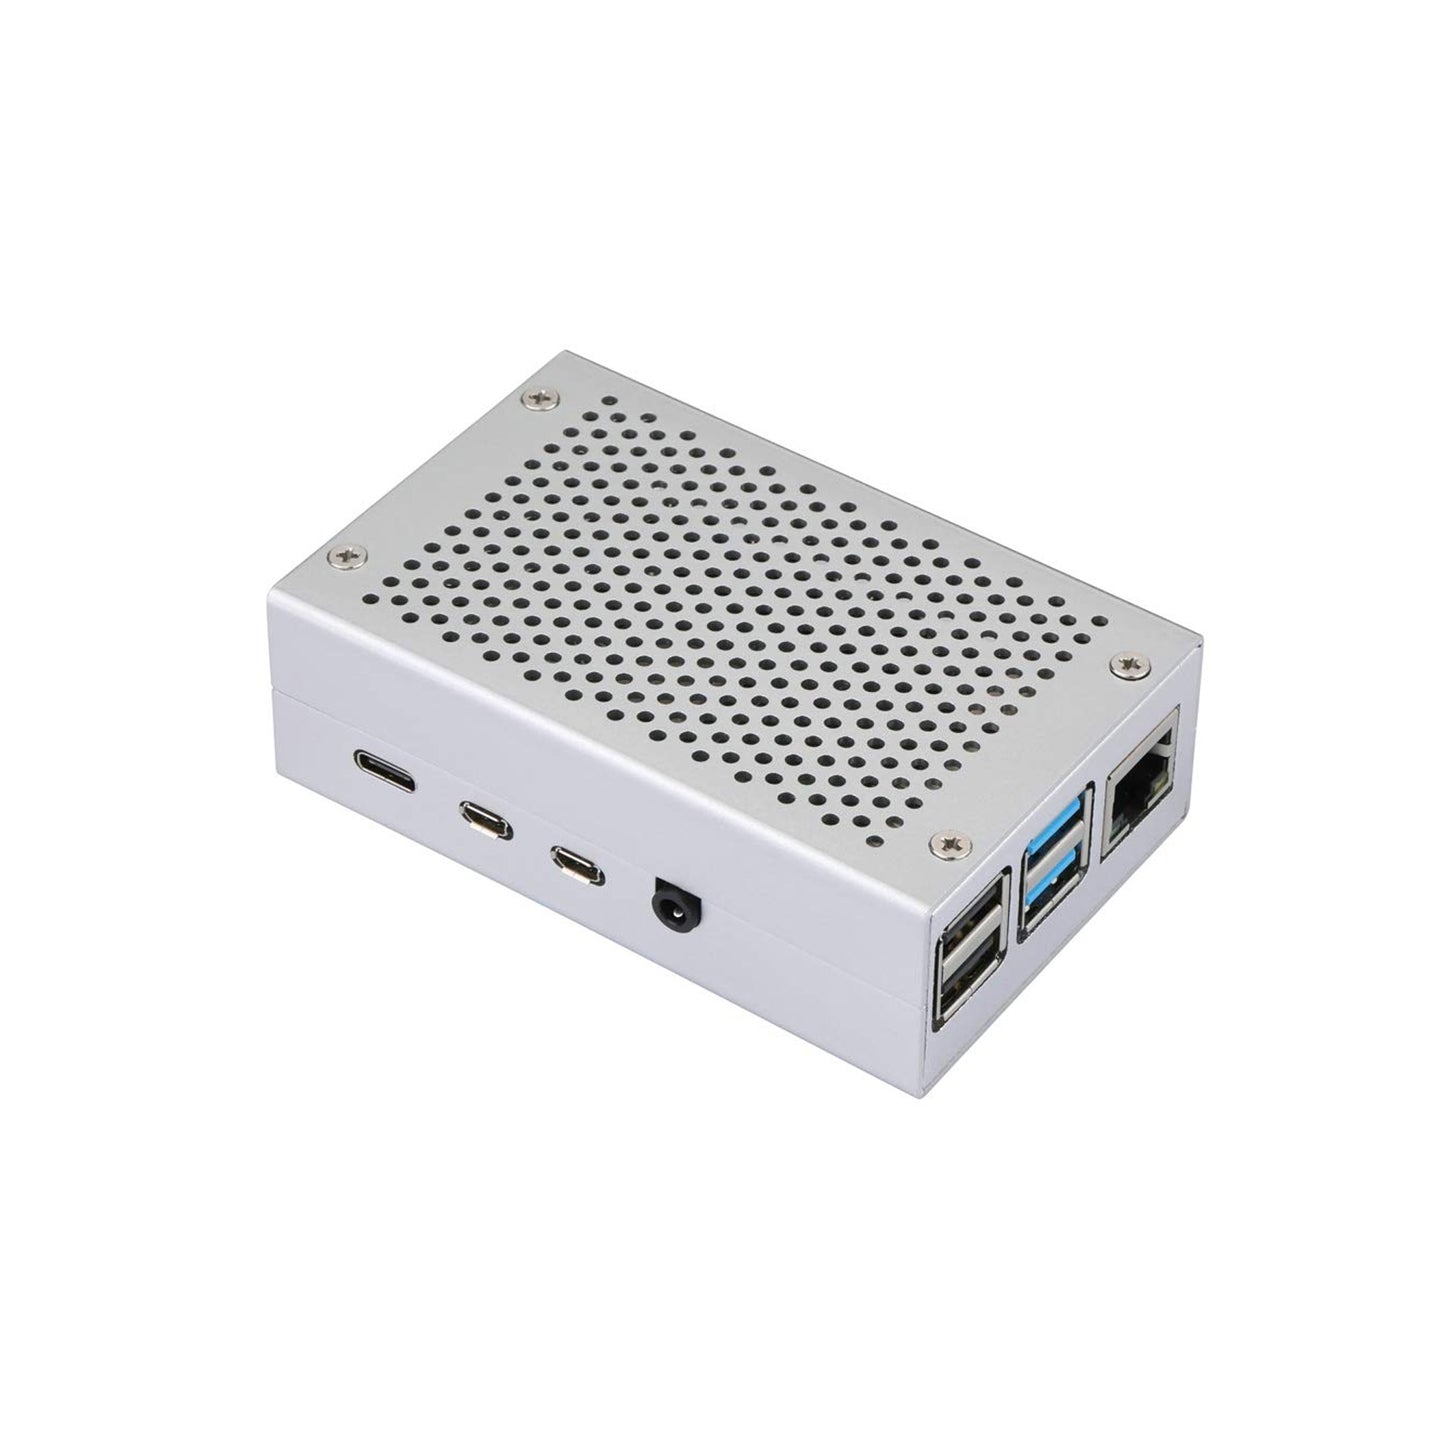 Raspberry Pi 4 Metal Case Aluminum Raspberry Pi 4 Case with Cooling Fan for Raspberry Pi 4 Model B, B+ (Silver) - RS2450 - REES52